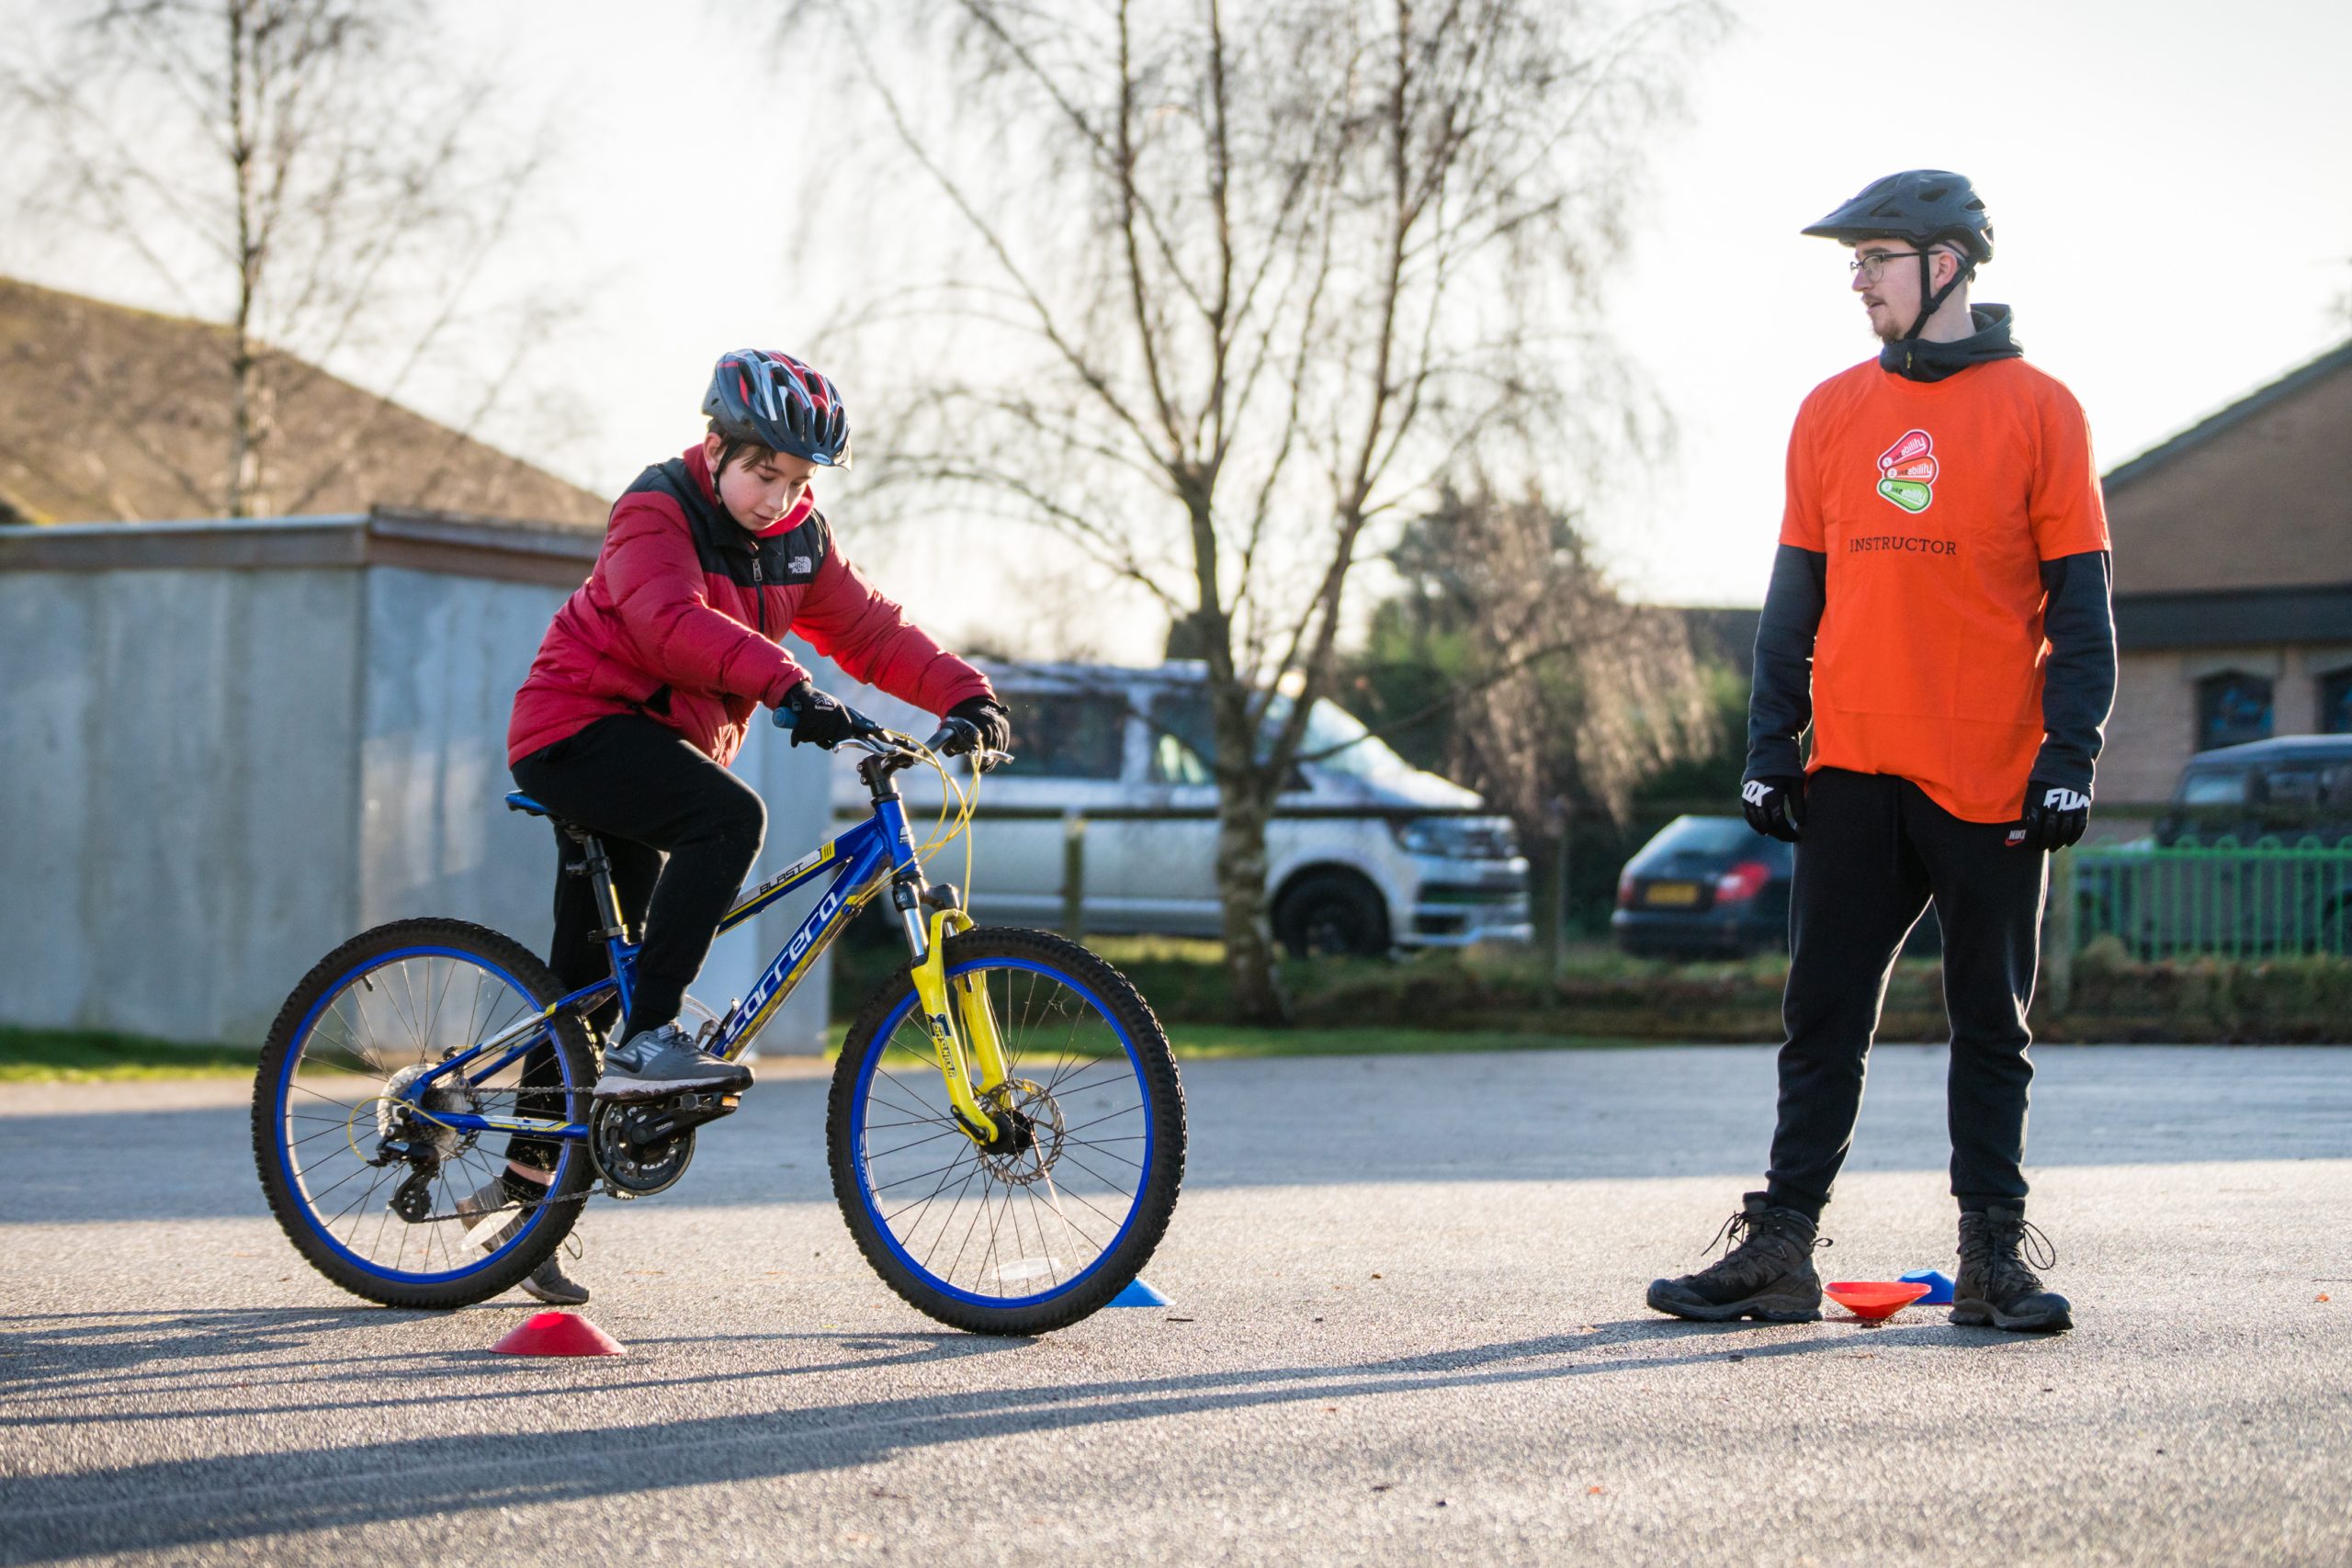 A young boy on a bike next to a Bikeability instructor